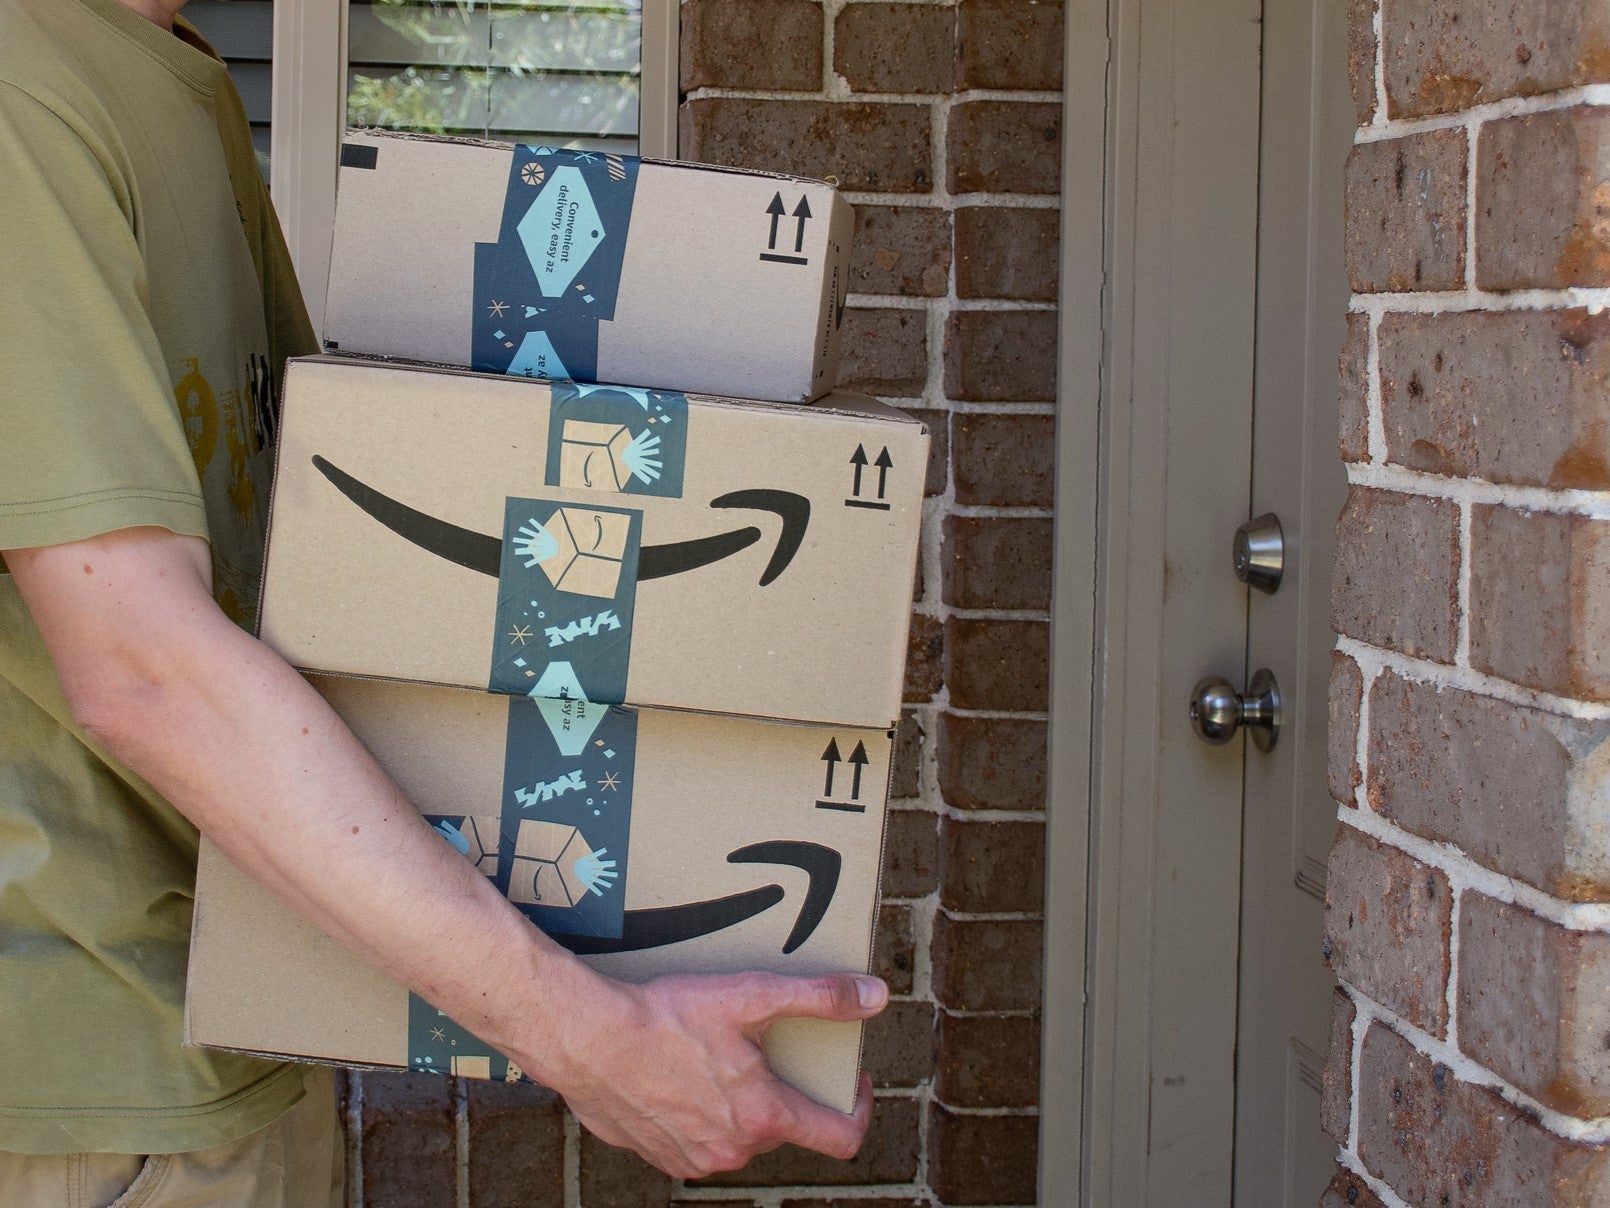 US customers will be able to directly thank their drivers for making Amazon deliveries